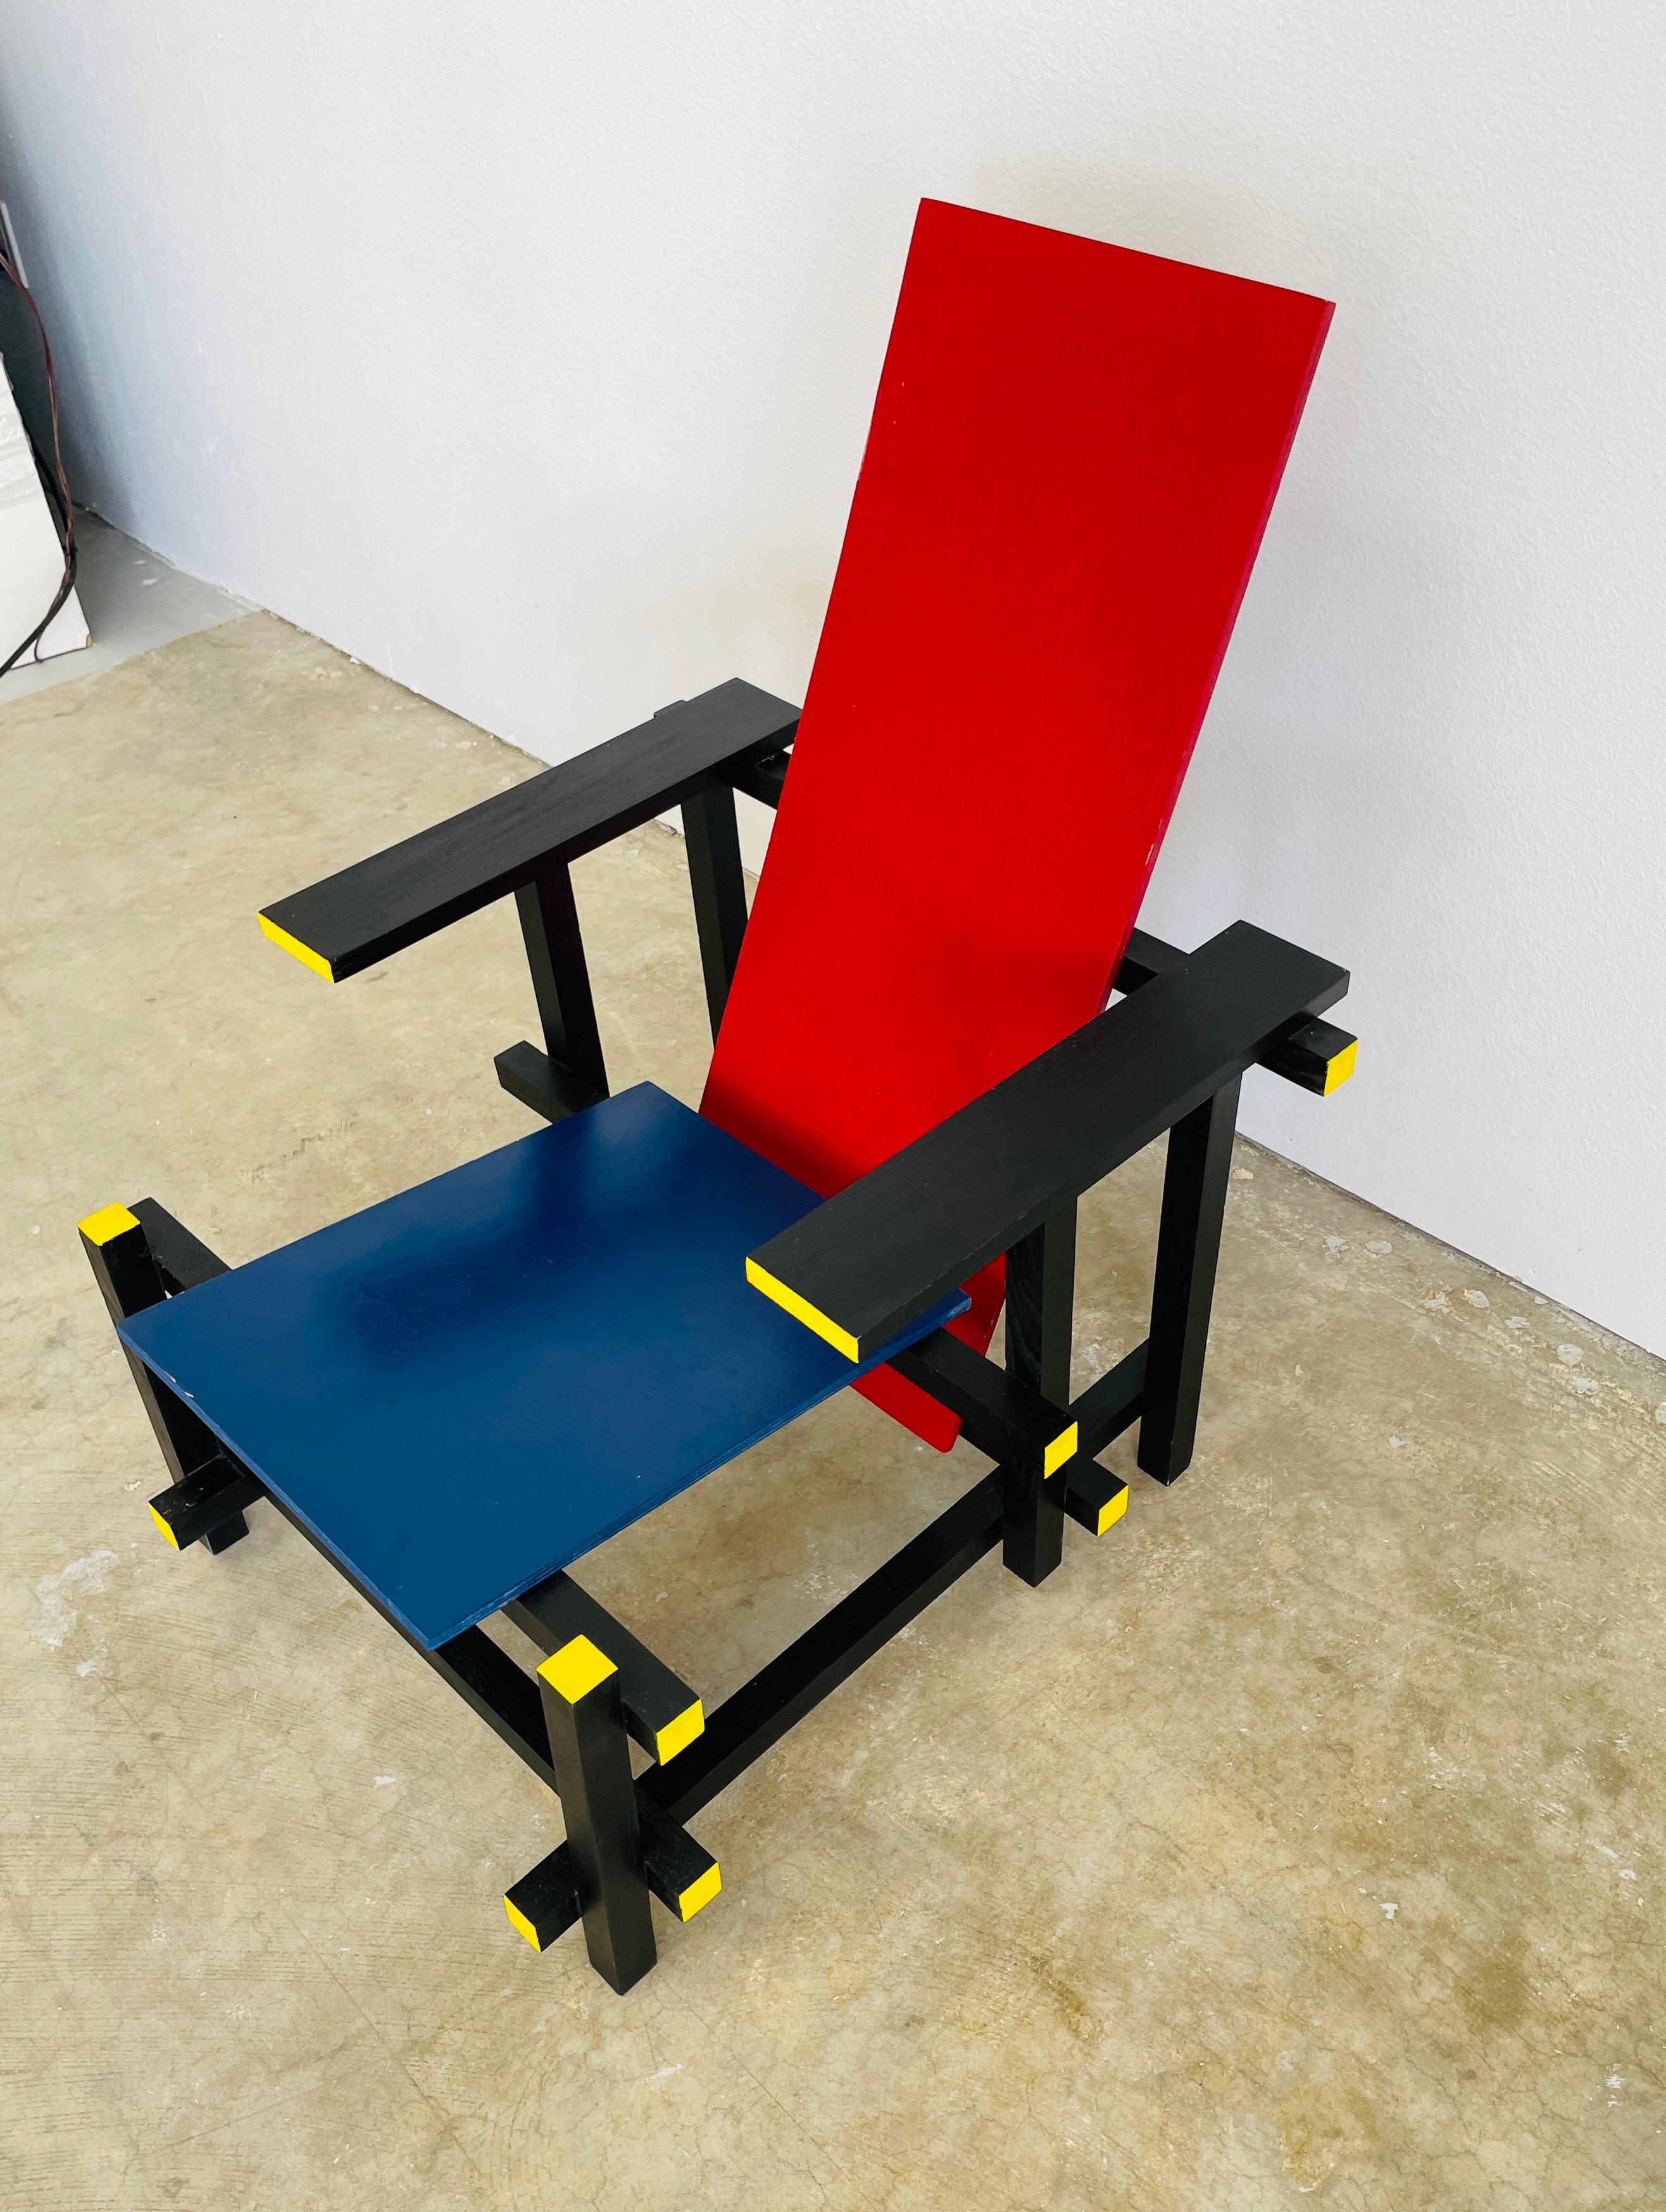 Vintage Gerrit Rietveld Style Red Blue De Stijl Wood Chair MCM Bauhaus In Good Condition For Sale In Palm Desert, CA